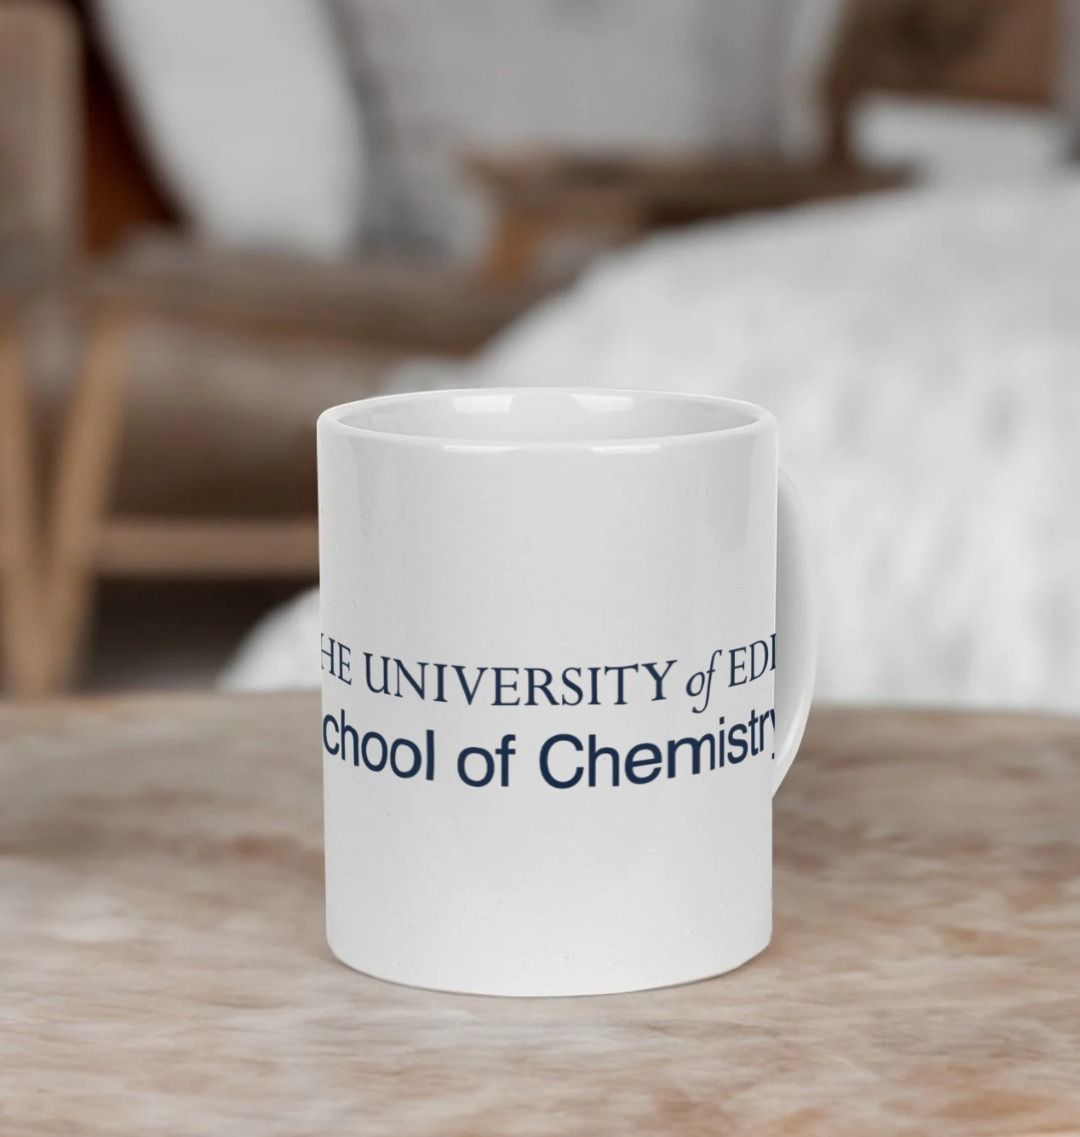 White School of Chemistry mug with multi-colour printed University crest and logo